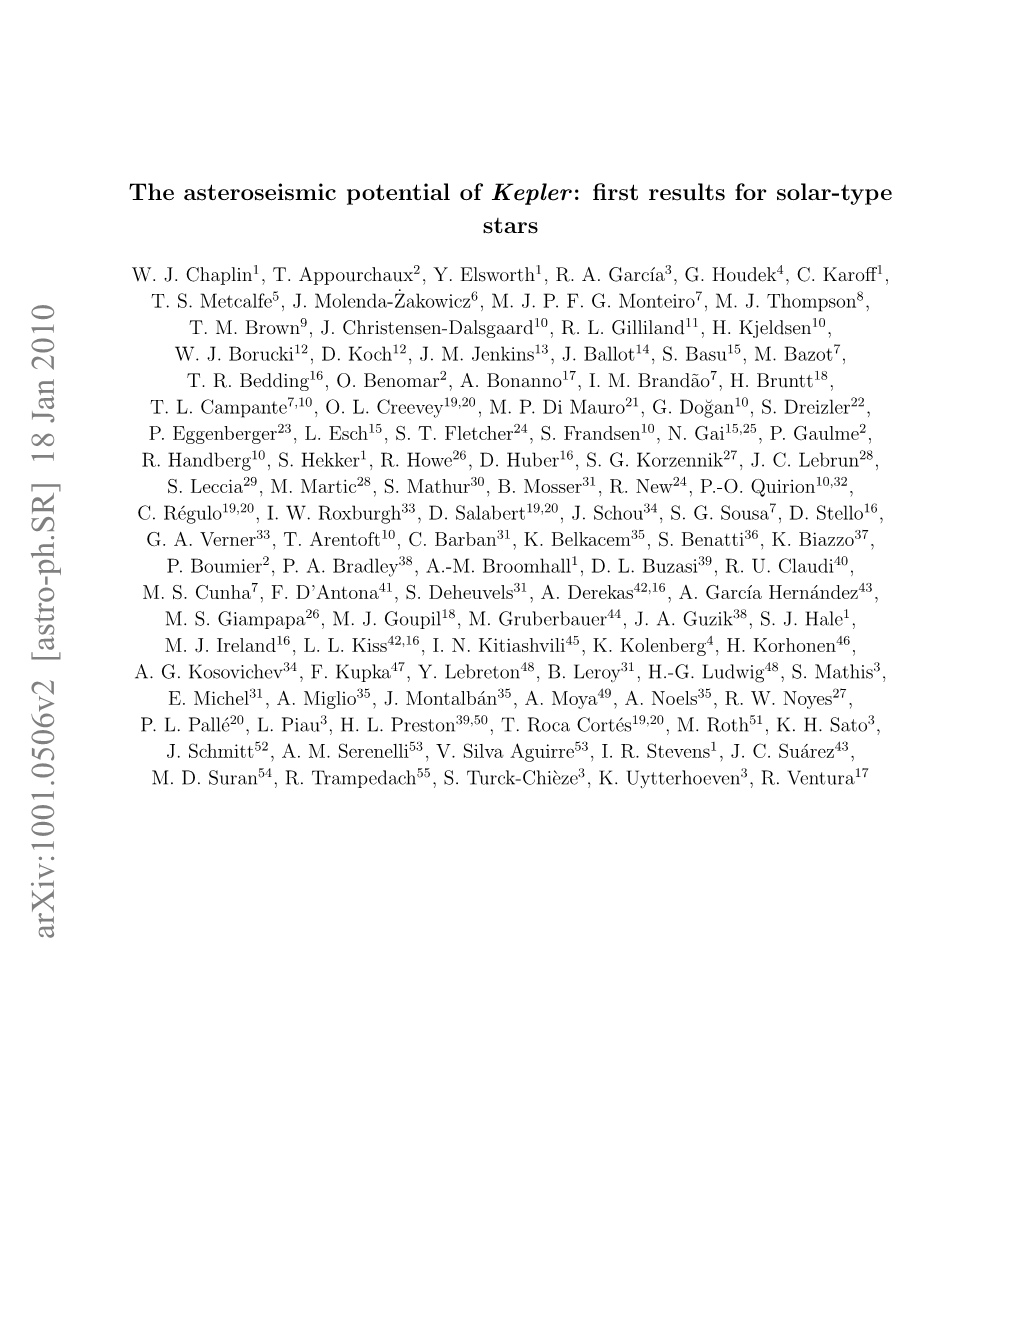 The Asteroseismic Potential of Kepler: First Results for Solar-Type Stars